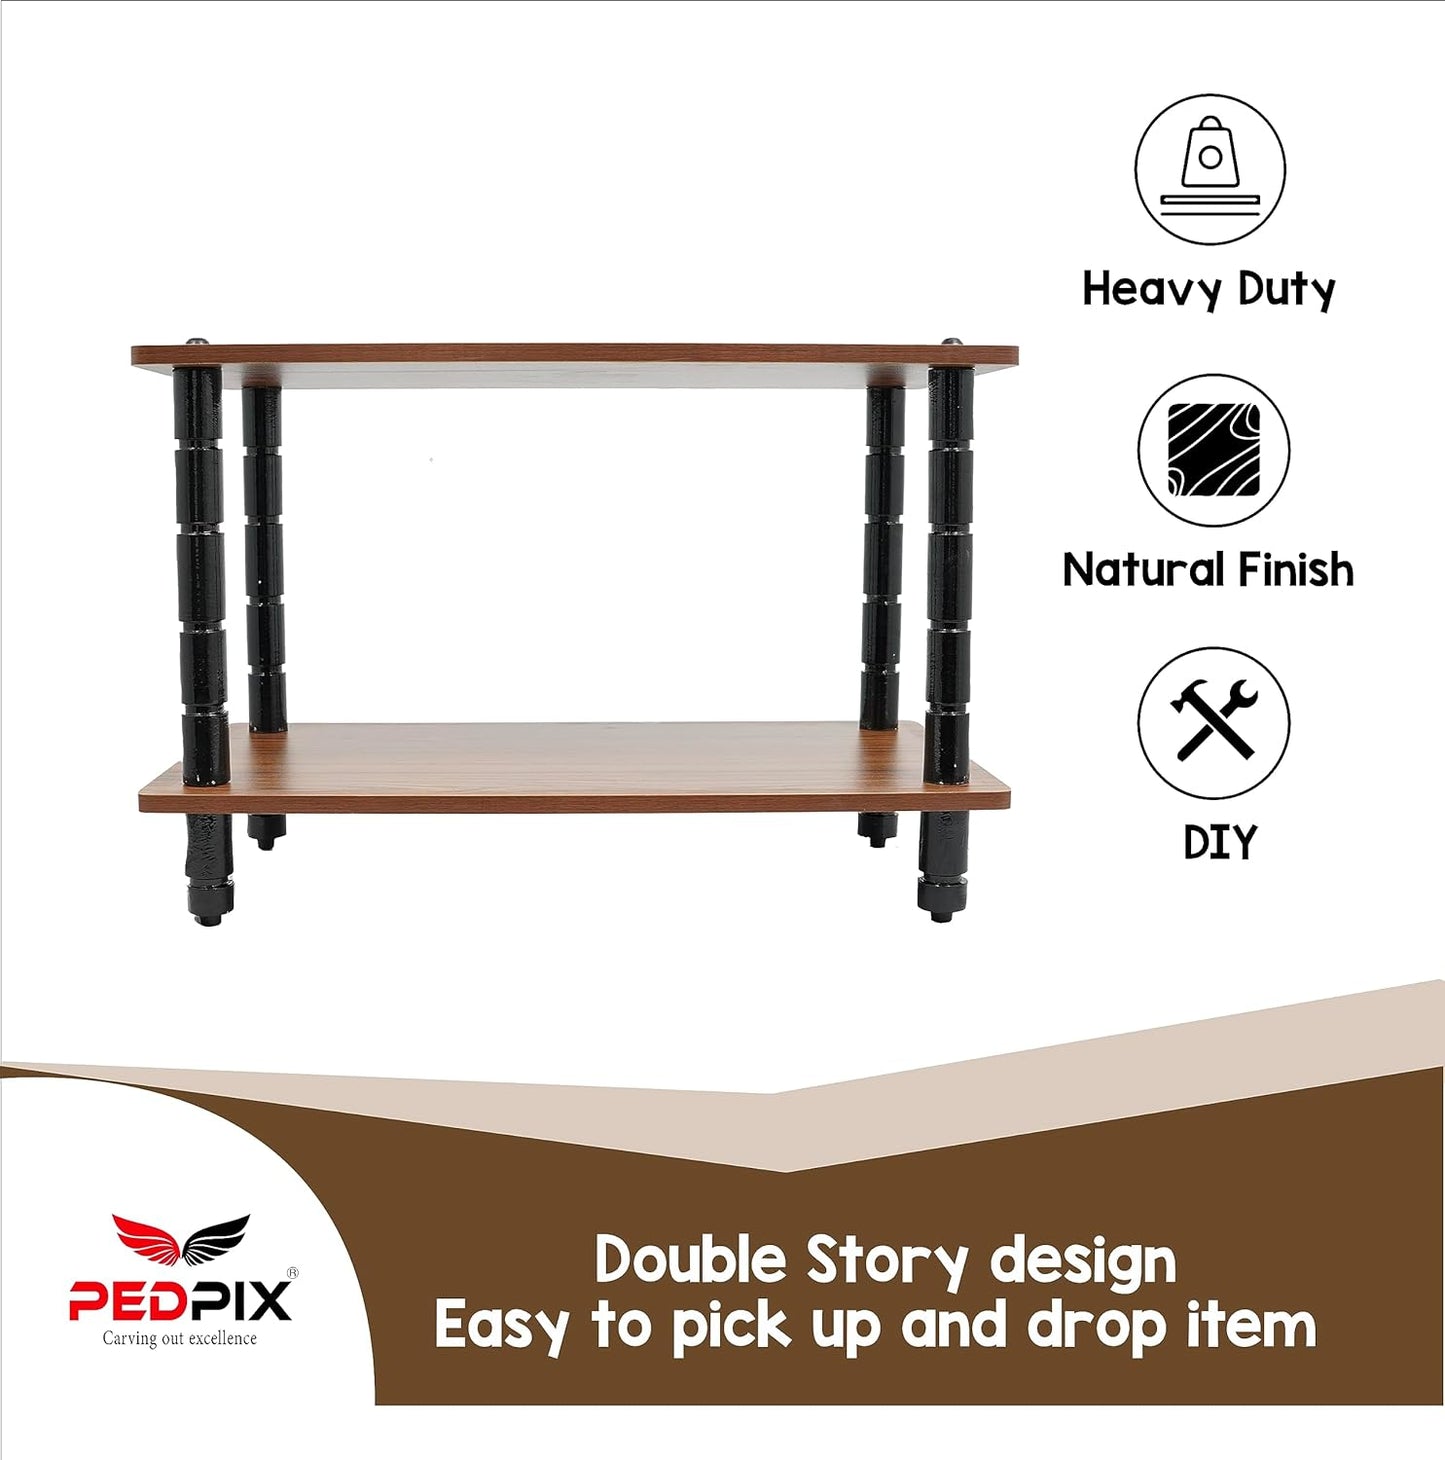 PEDPIX Engineered Wood Coffee Table for The Living Room: A Stylish and Durable Coffee Table with Plenty of Space for Drinks, Snacks, and Books